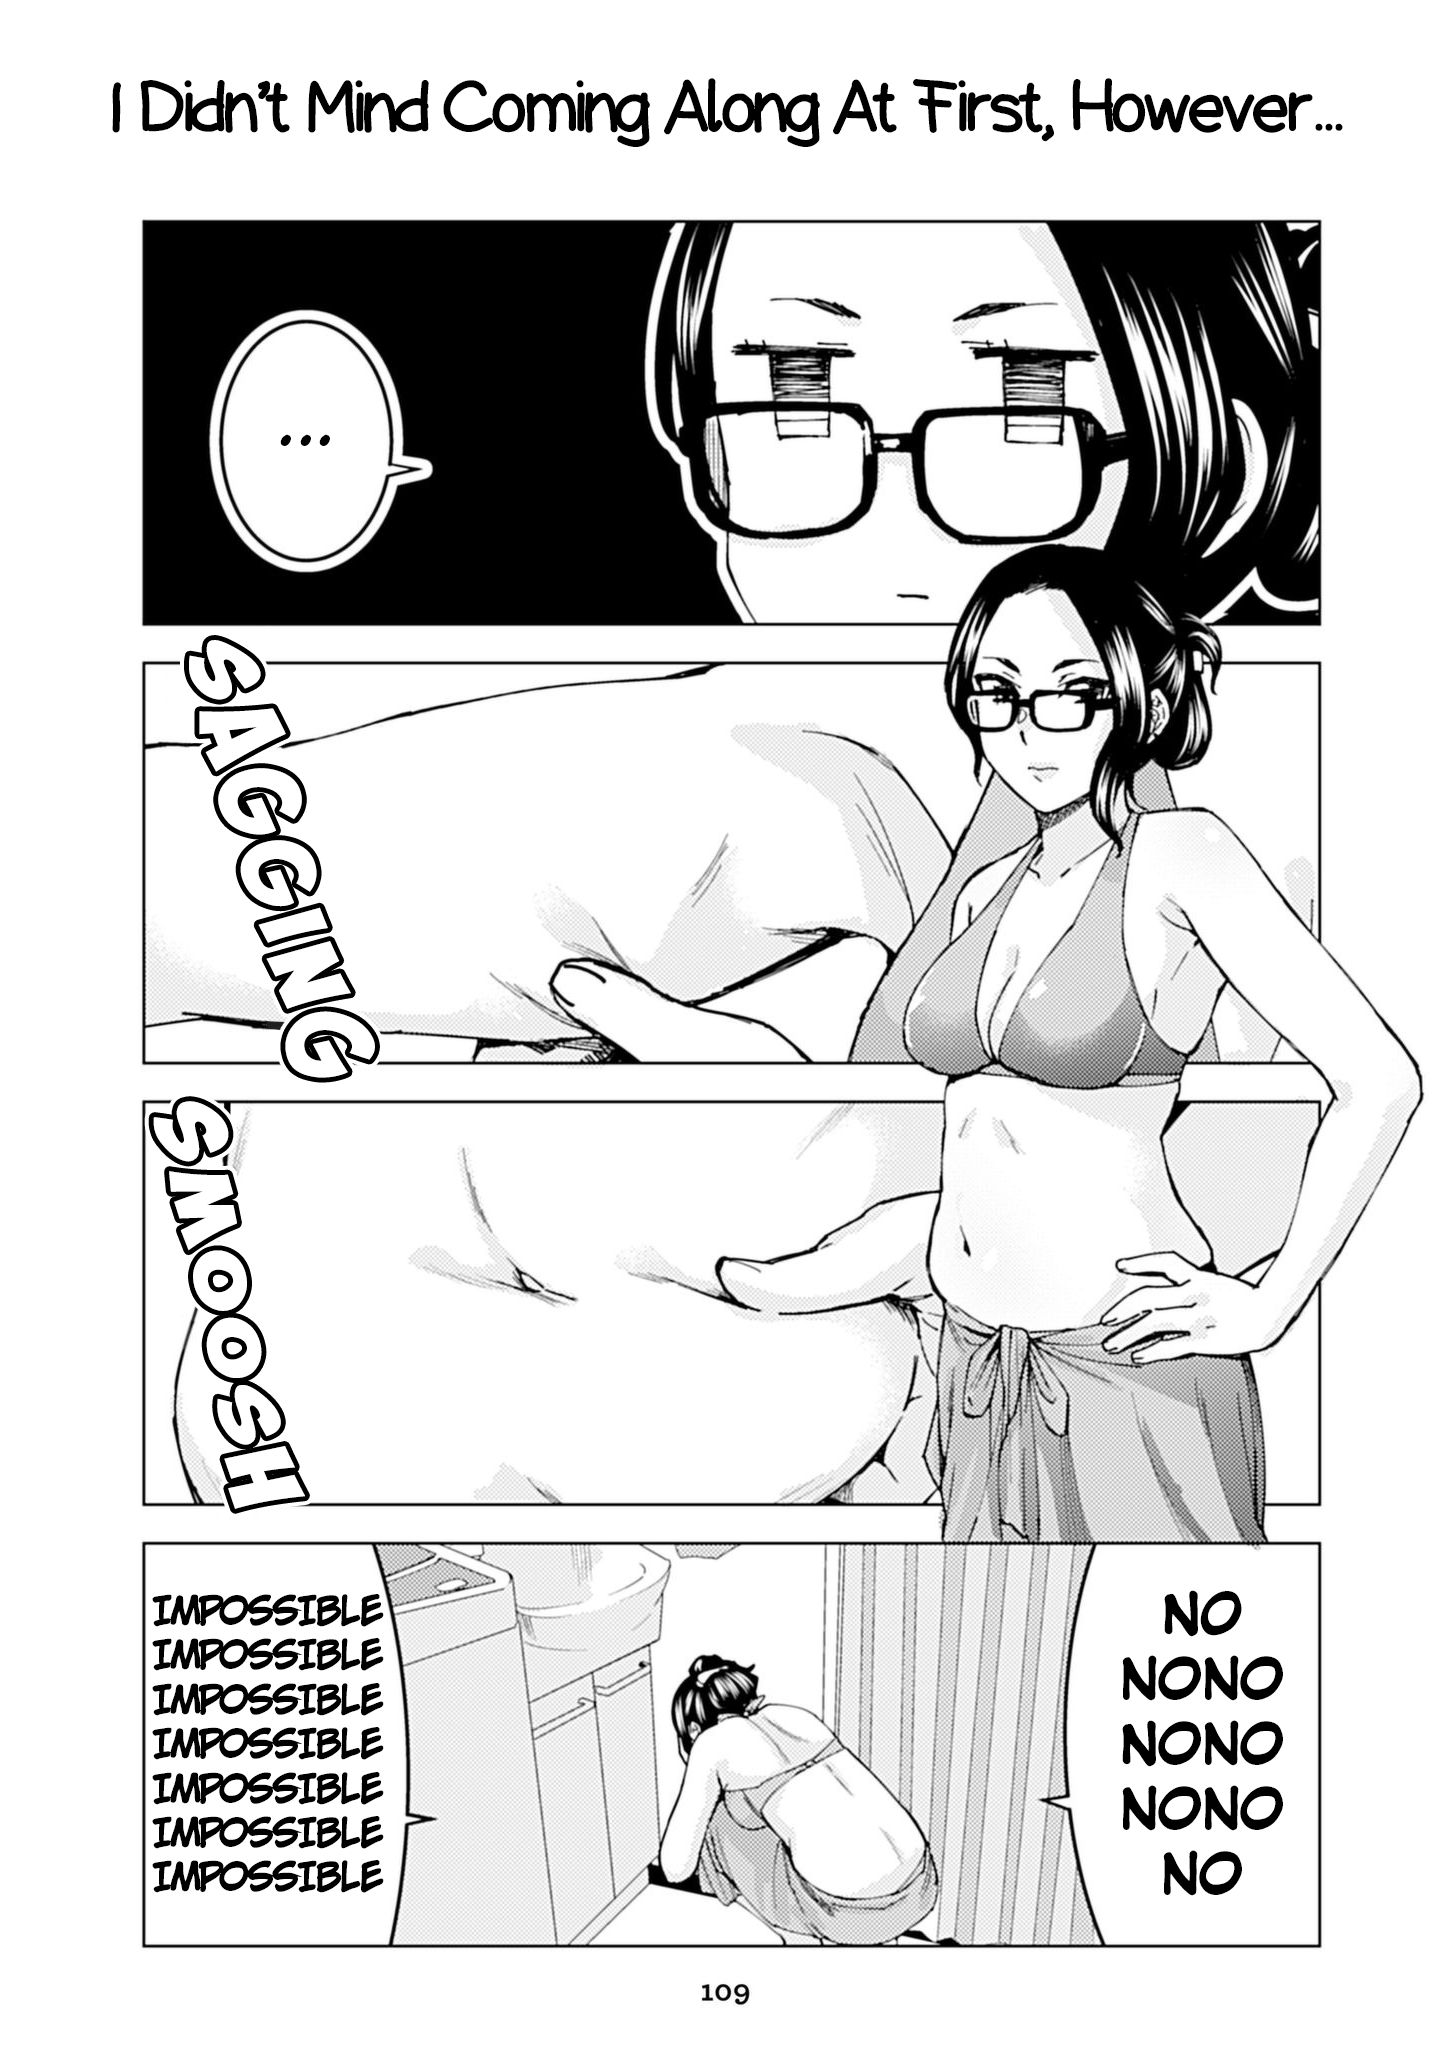 Kusanagi sensei is Being Tested Vol. 1 Ch. 96 I Didn't Mind Coming Along at First, However...